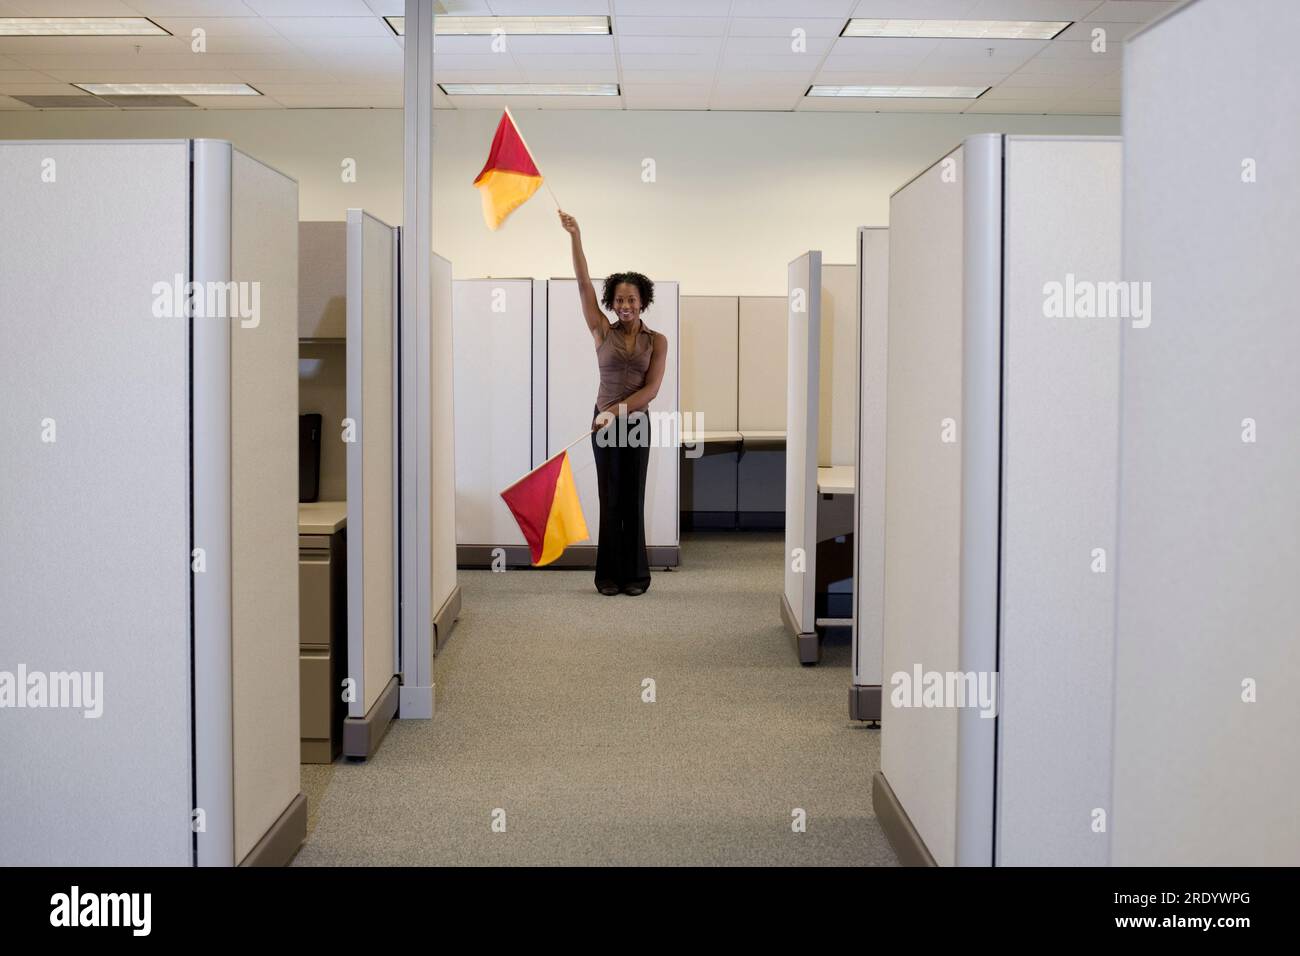 Woman uses semaphore flags to signal coworkers in cubicle-filled office. Stock Photo